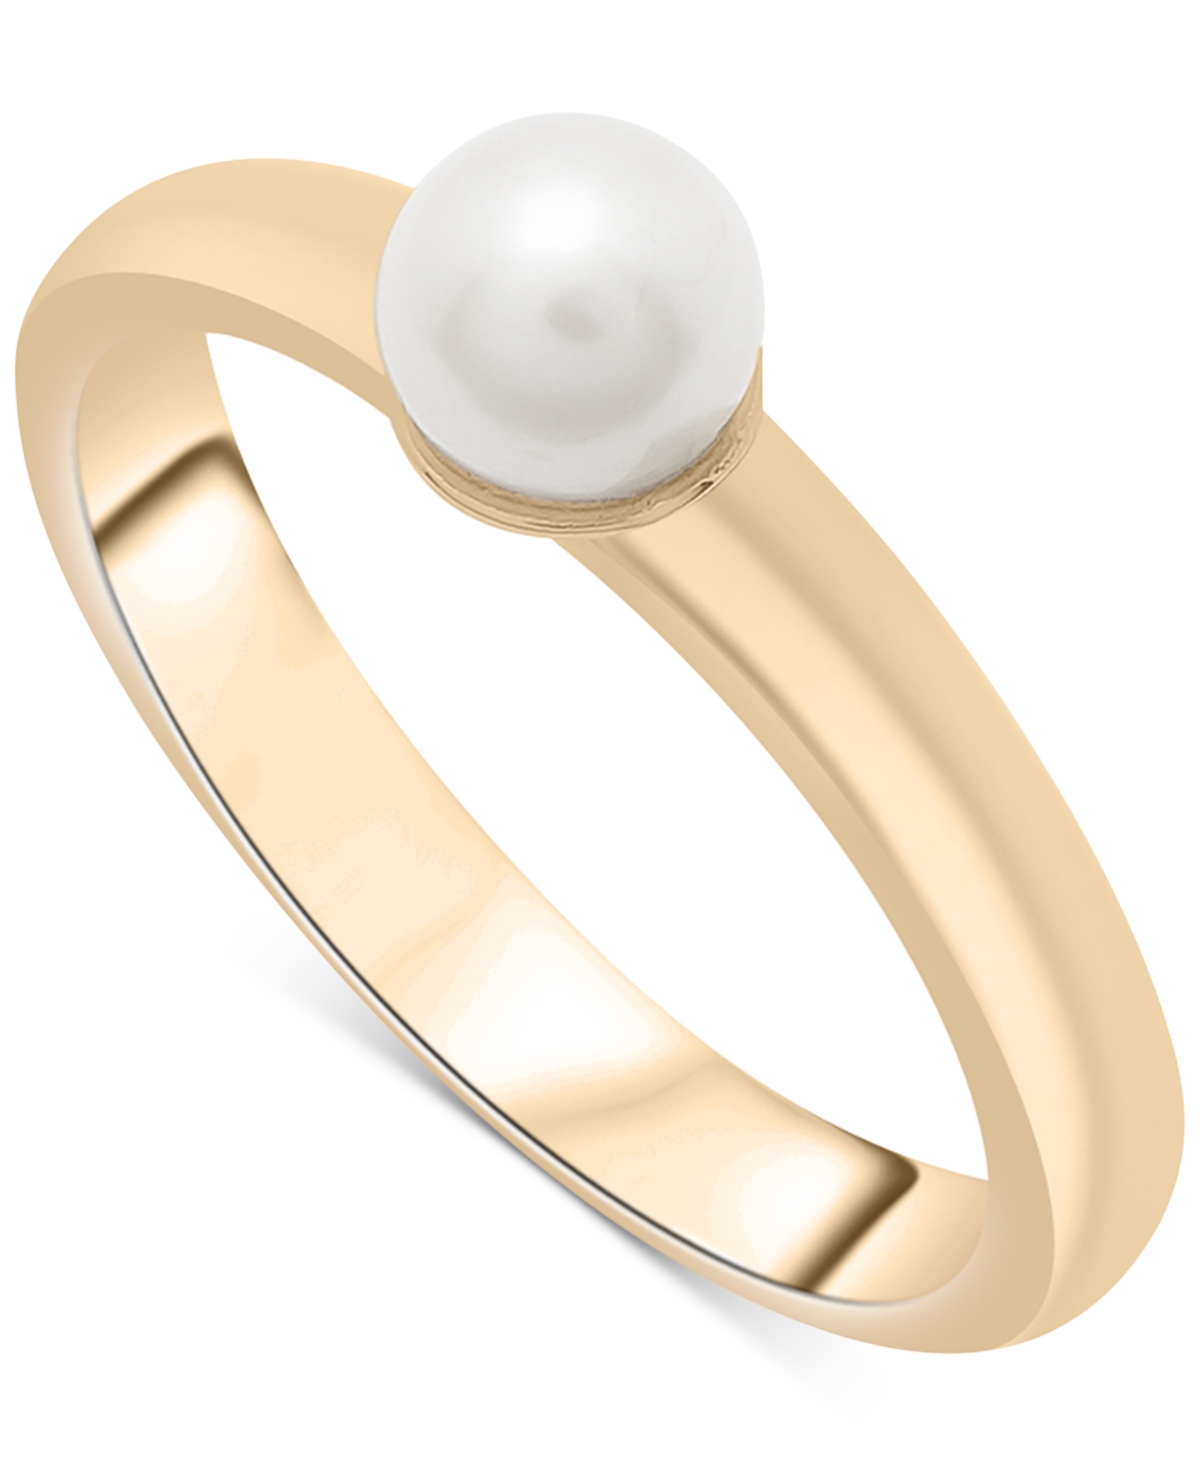 Cultured Freshwater Pearl (5mm) Ring in Gold Vermeil, Created for Macy's - Gold Vermeil